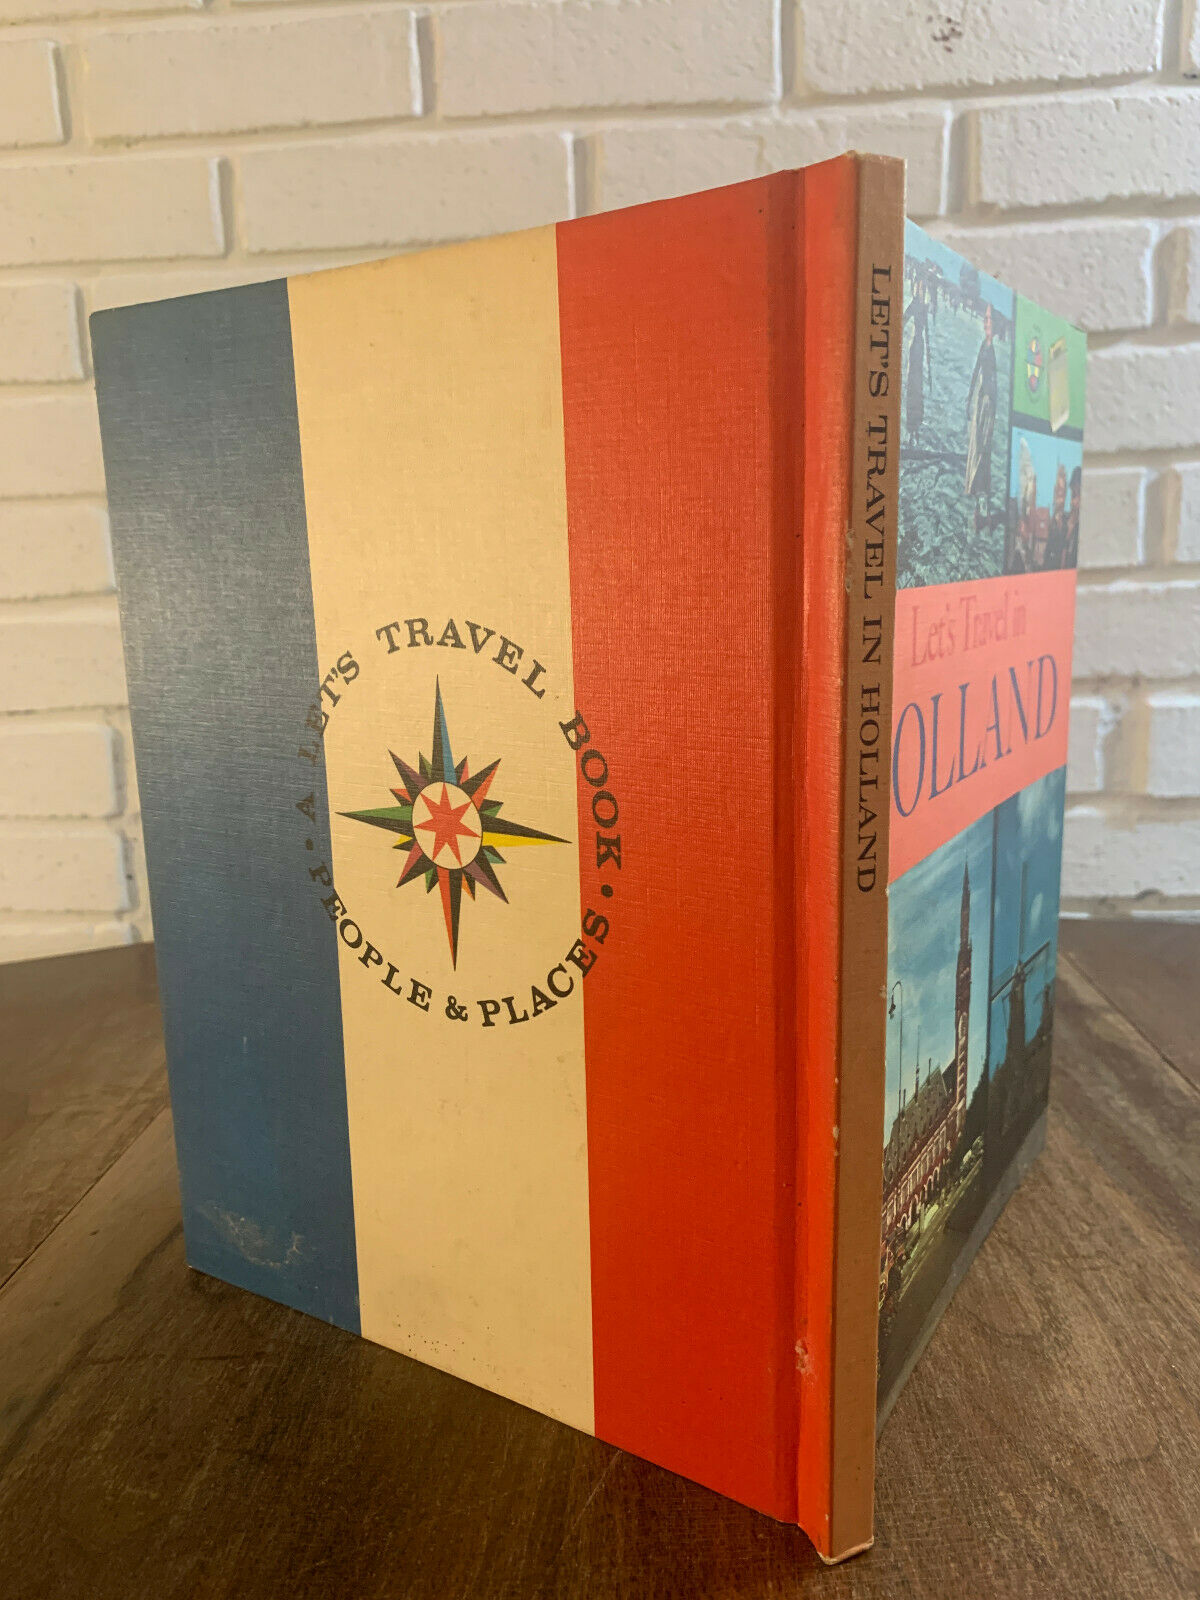 Let's Travel in Holland , Theodore Irwin, 1960, Q5